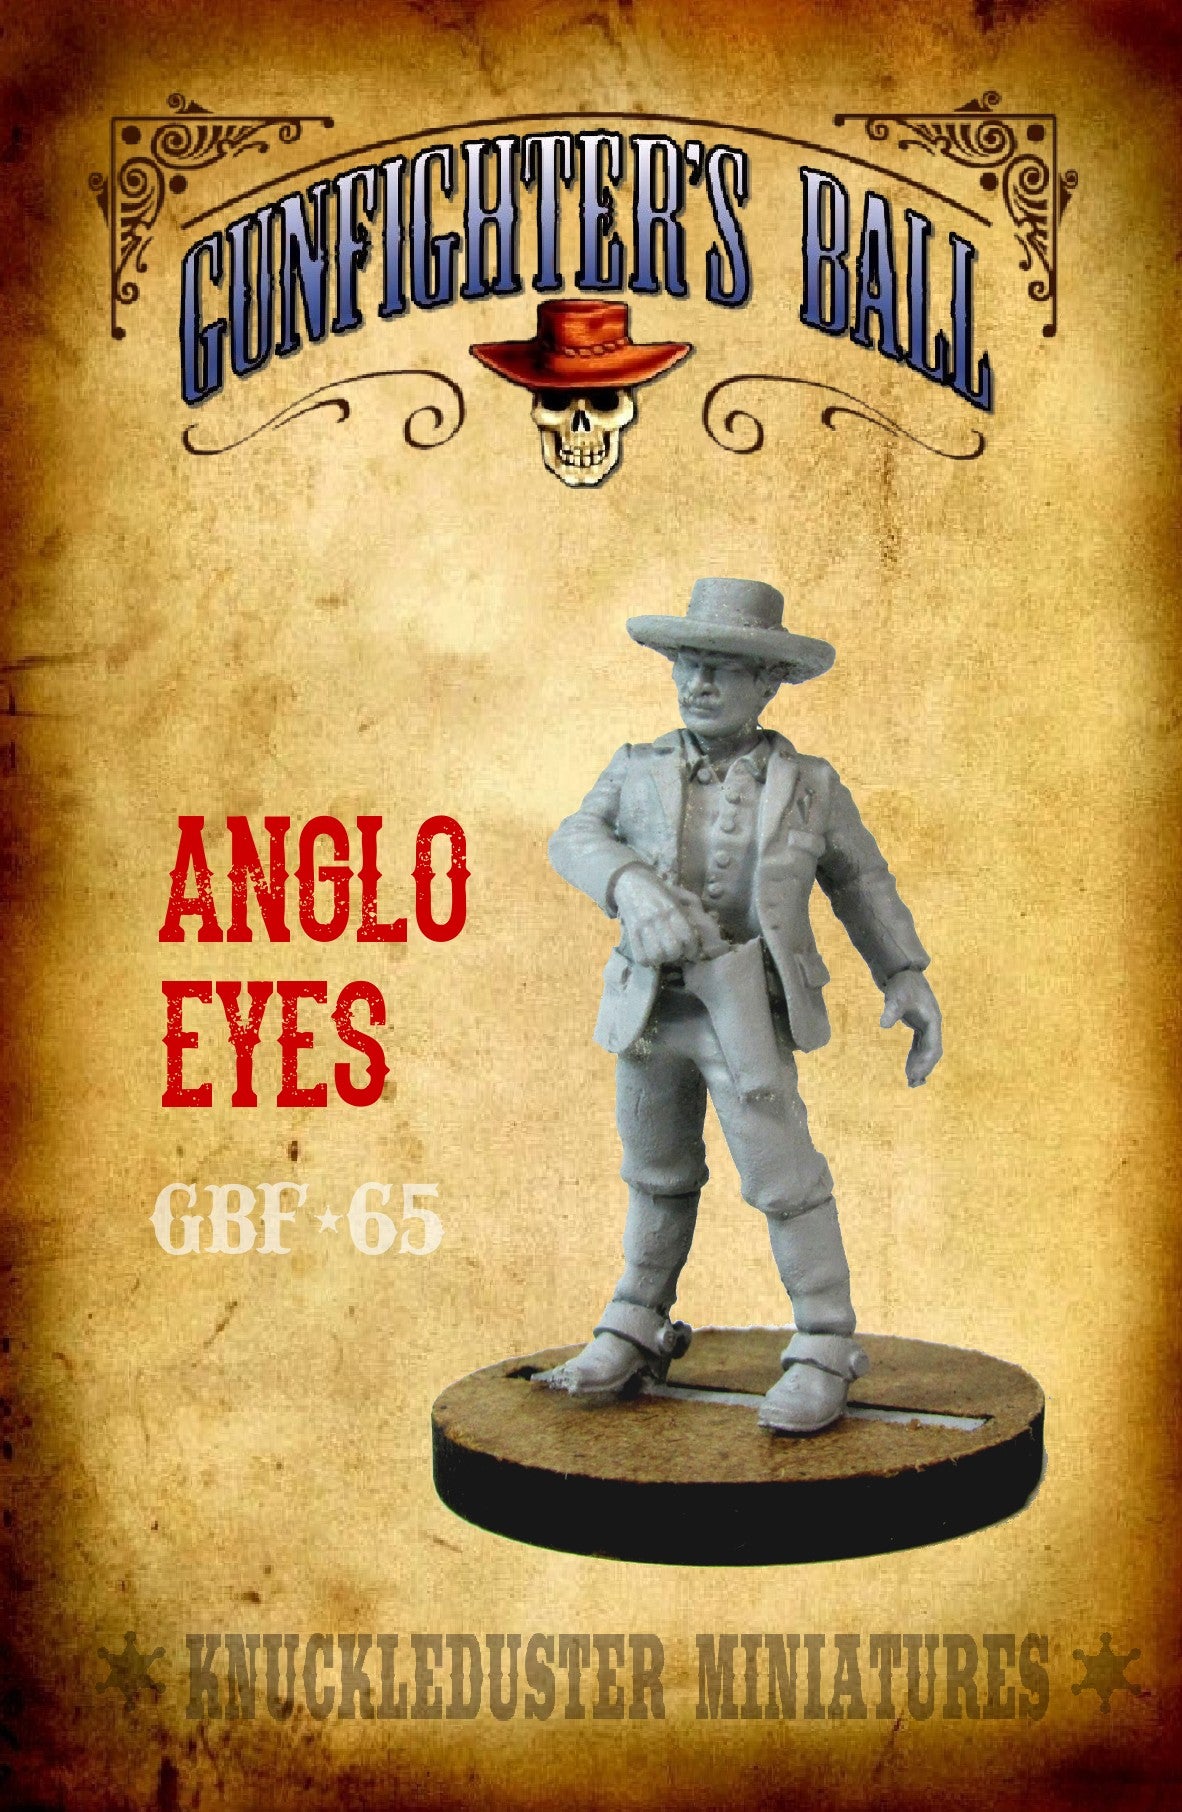 Anglo Eyes